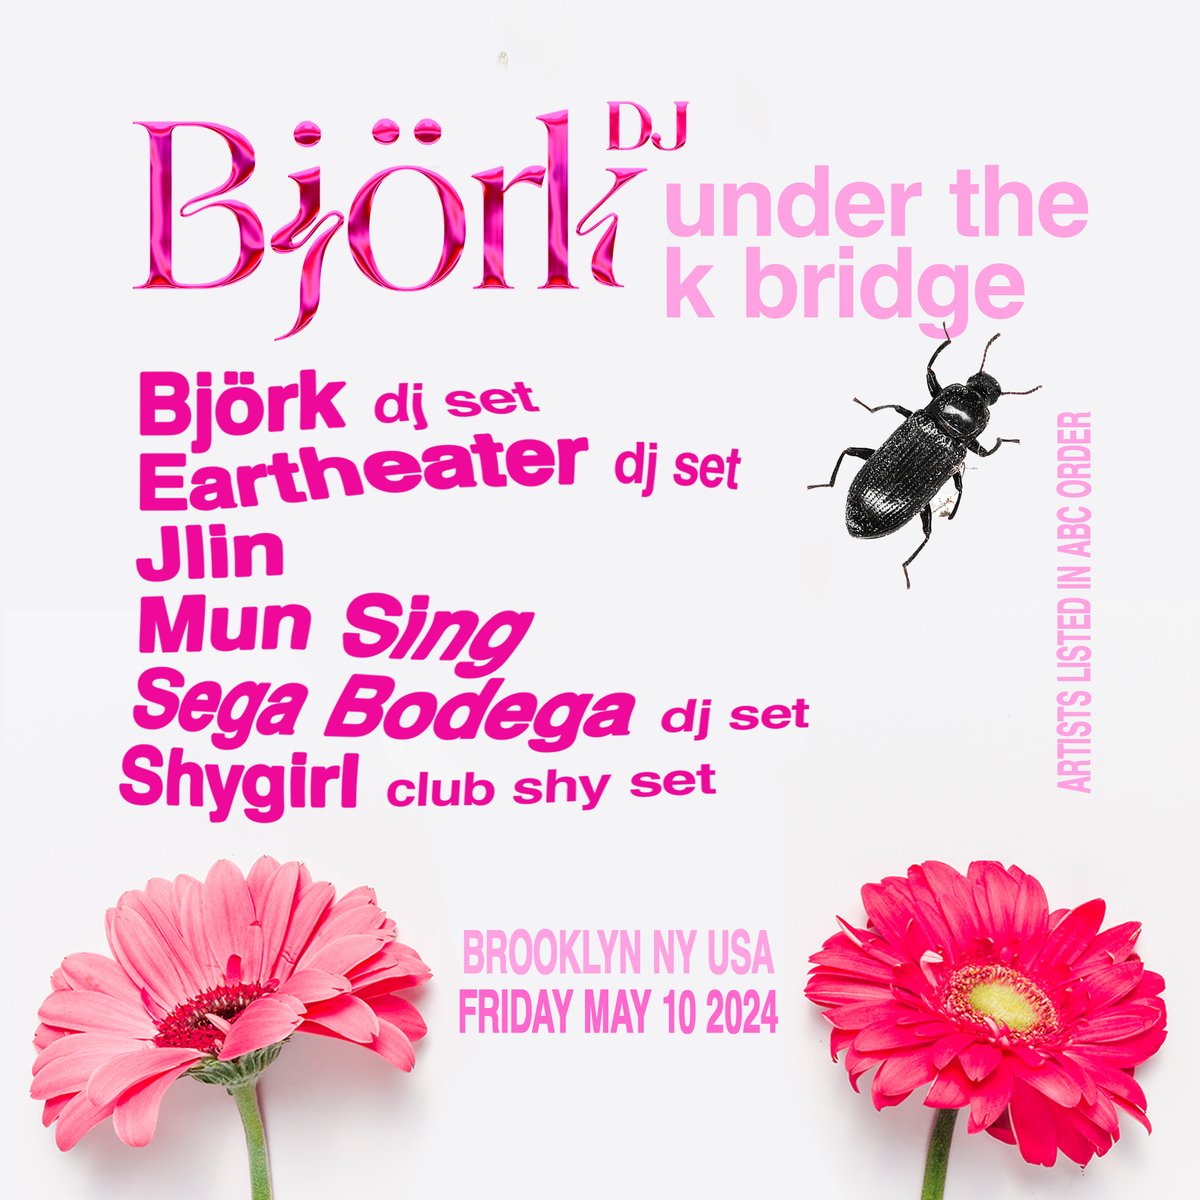 so excited about re-uniting on this brooklyn dancefloor ... it´s been a while !! invited my friends to come along with me and so thrilled they were all up for it can´t wait warmthness björk eartheater @trinityvigorsky jlin @Jlin_P mun sing sega bodega @segabodega shygirl